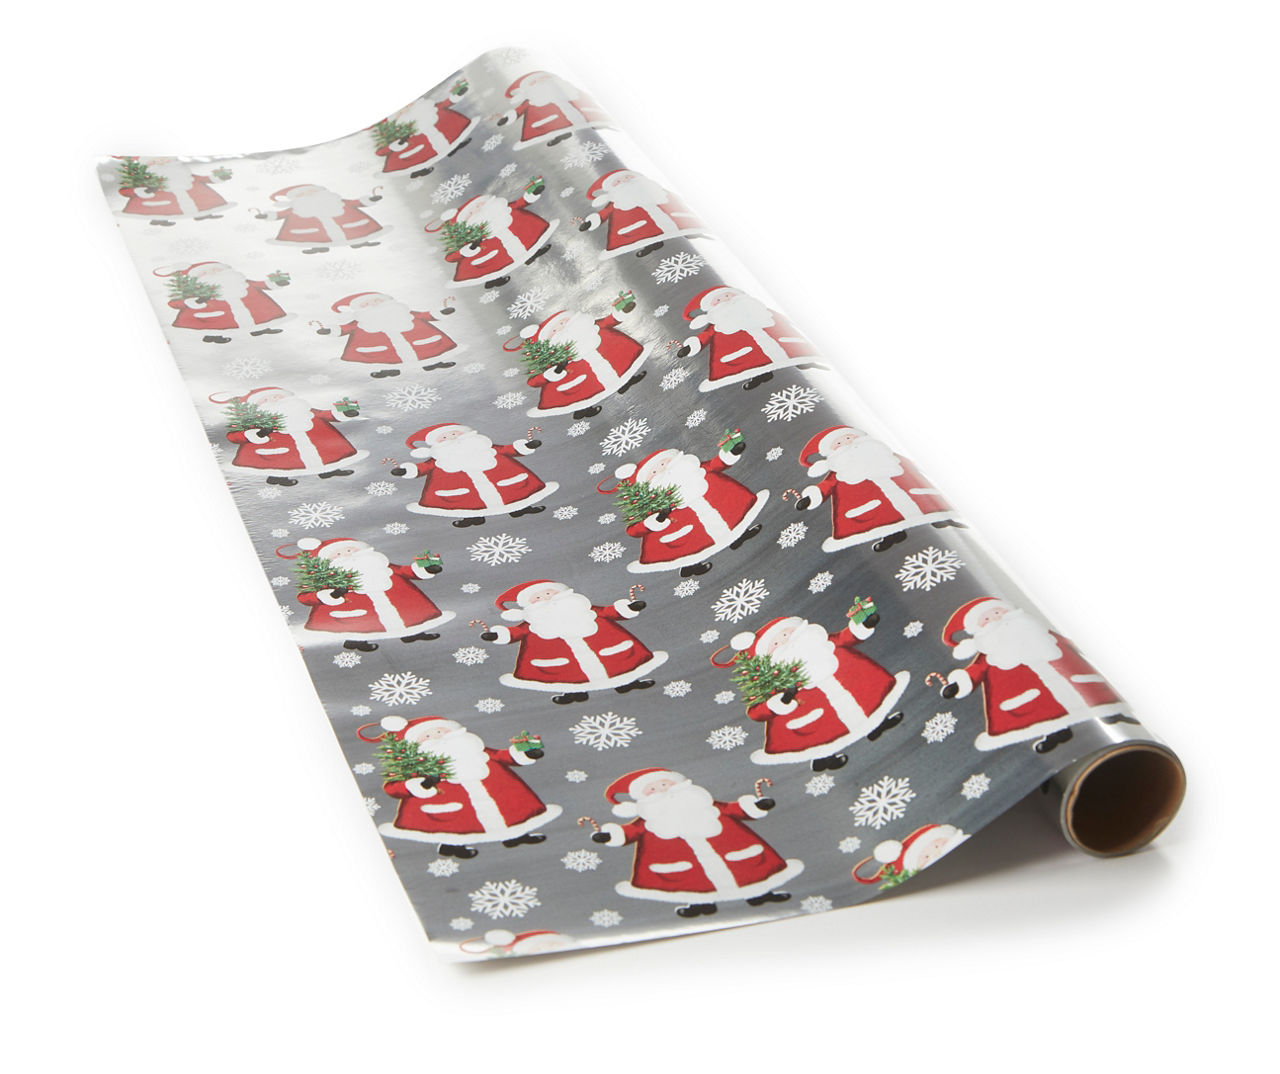 Holiday Woodland Santa/Fair Isle/Tree Gridline Foil Wrapping Paper